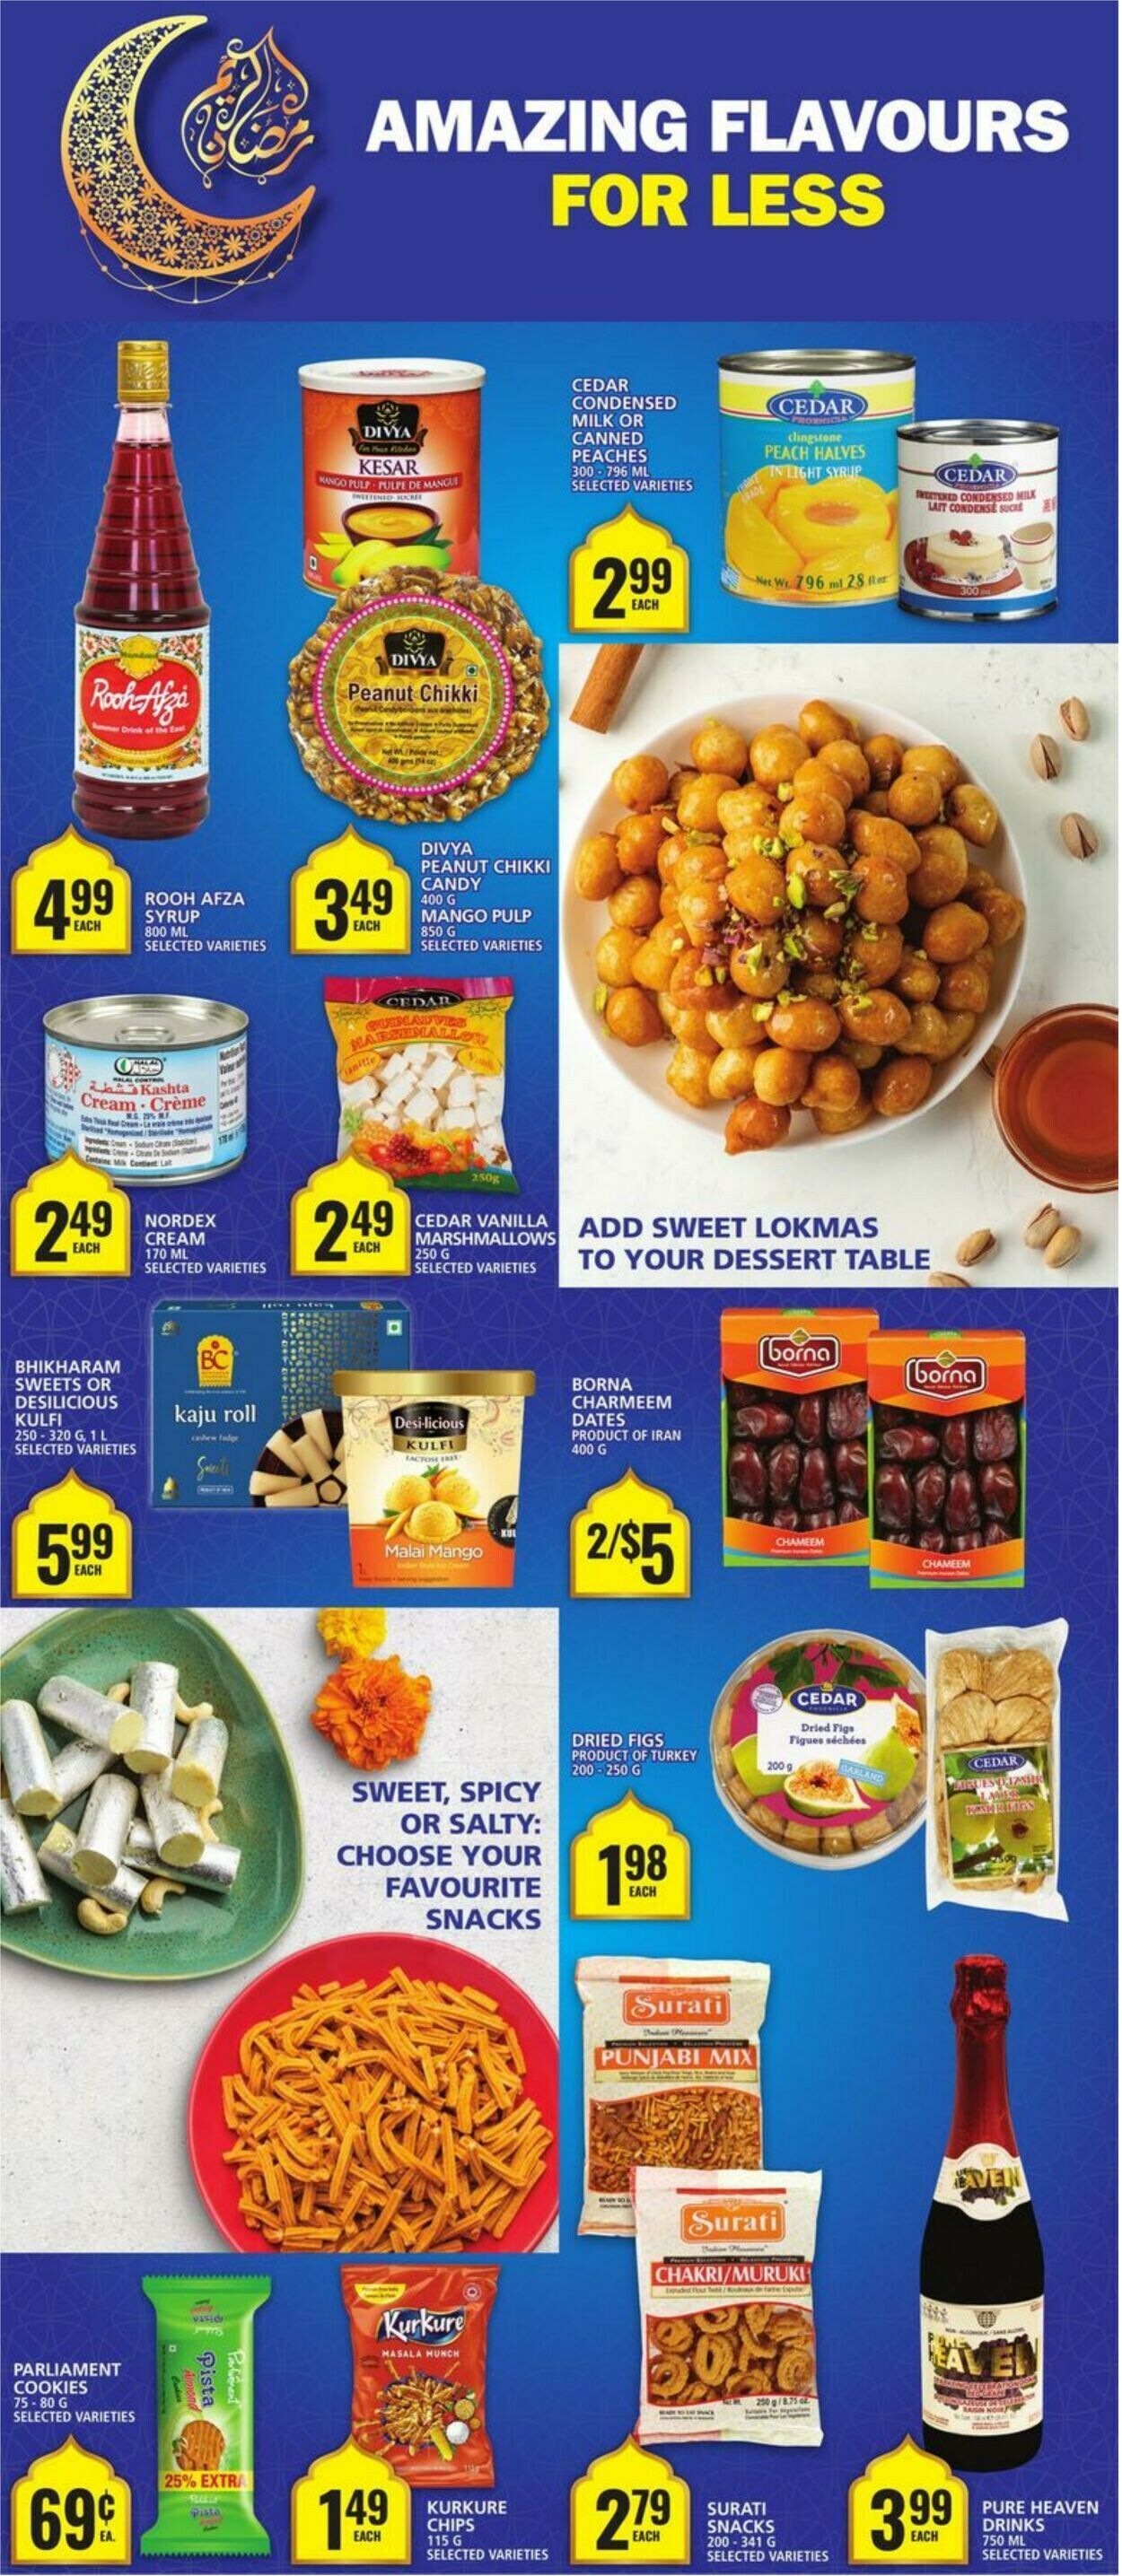 Food Basics Flyer from 03/28/2024